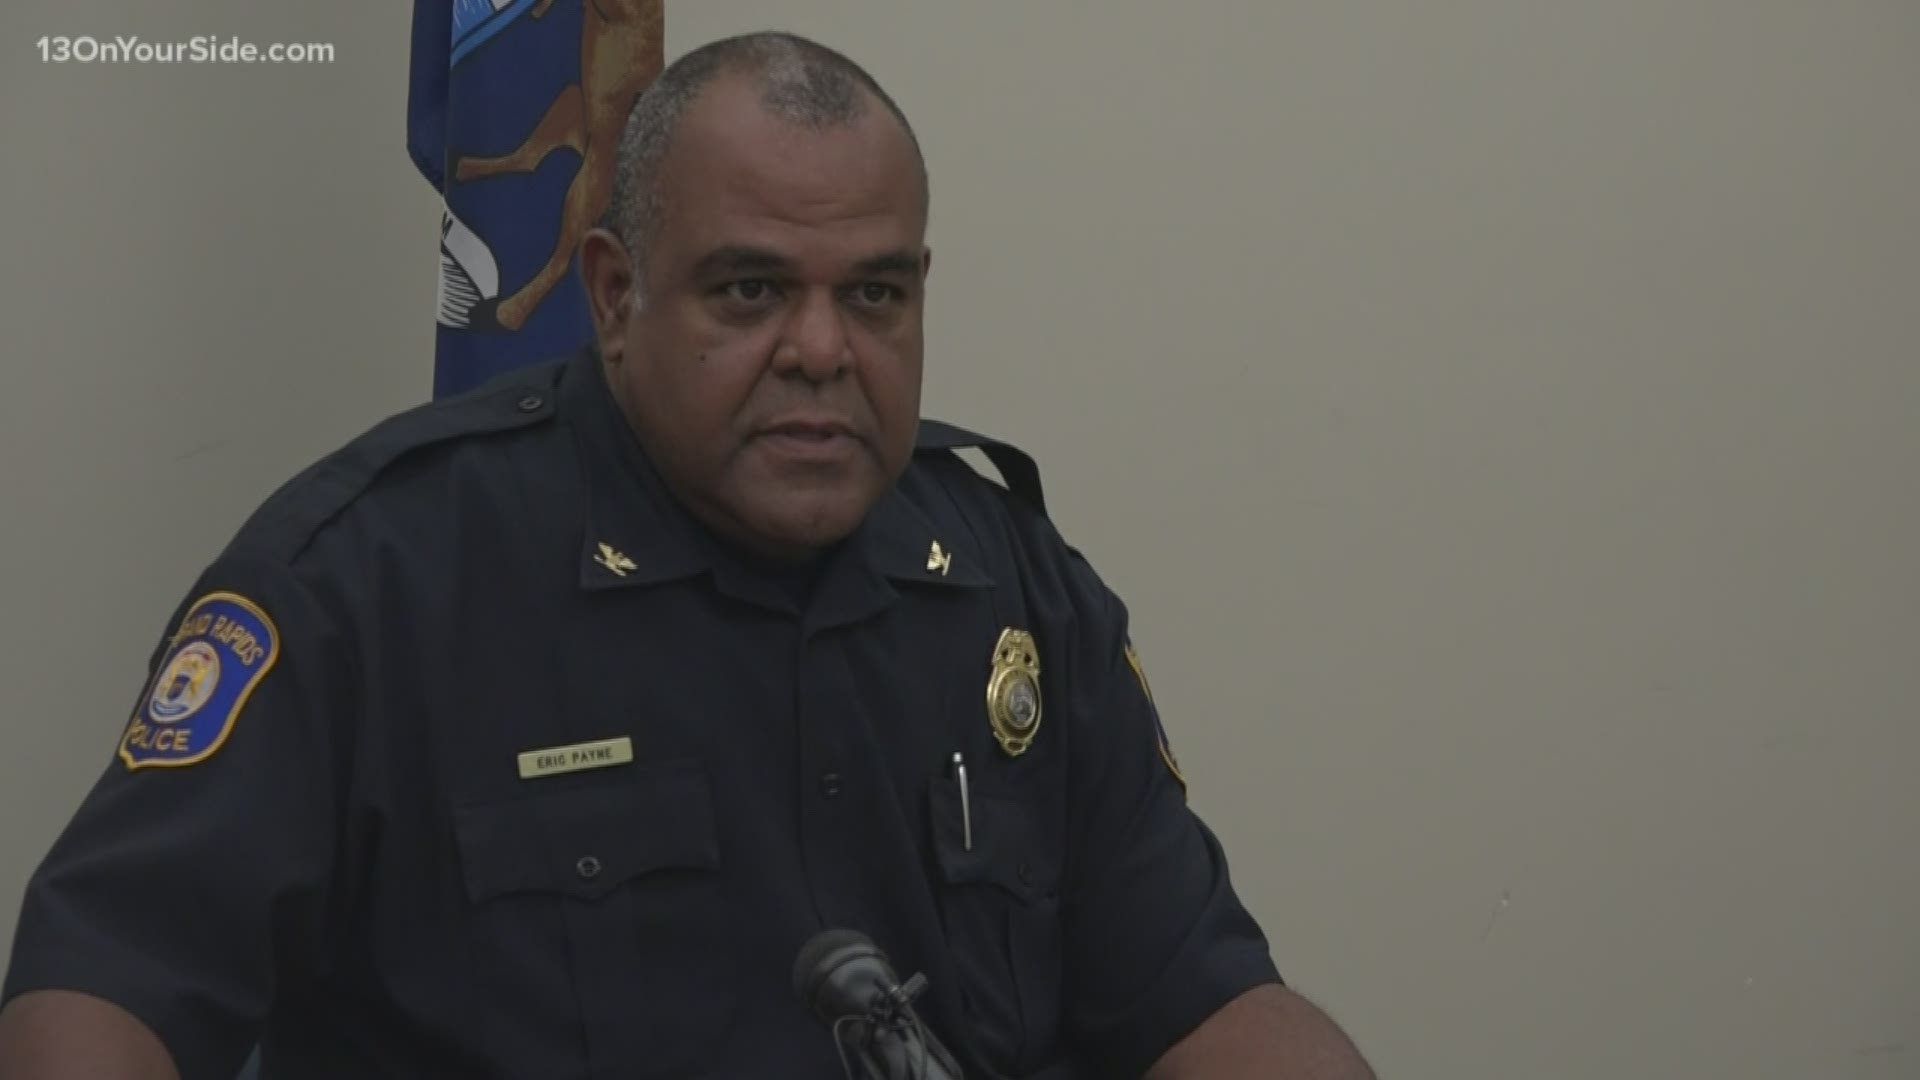 Grand Rapids Police Chief Eric Payne told the public and the media that GRPD is ready to use all of their resources to find those responsible.